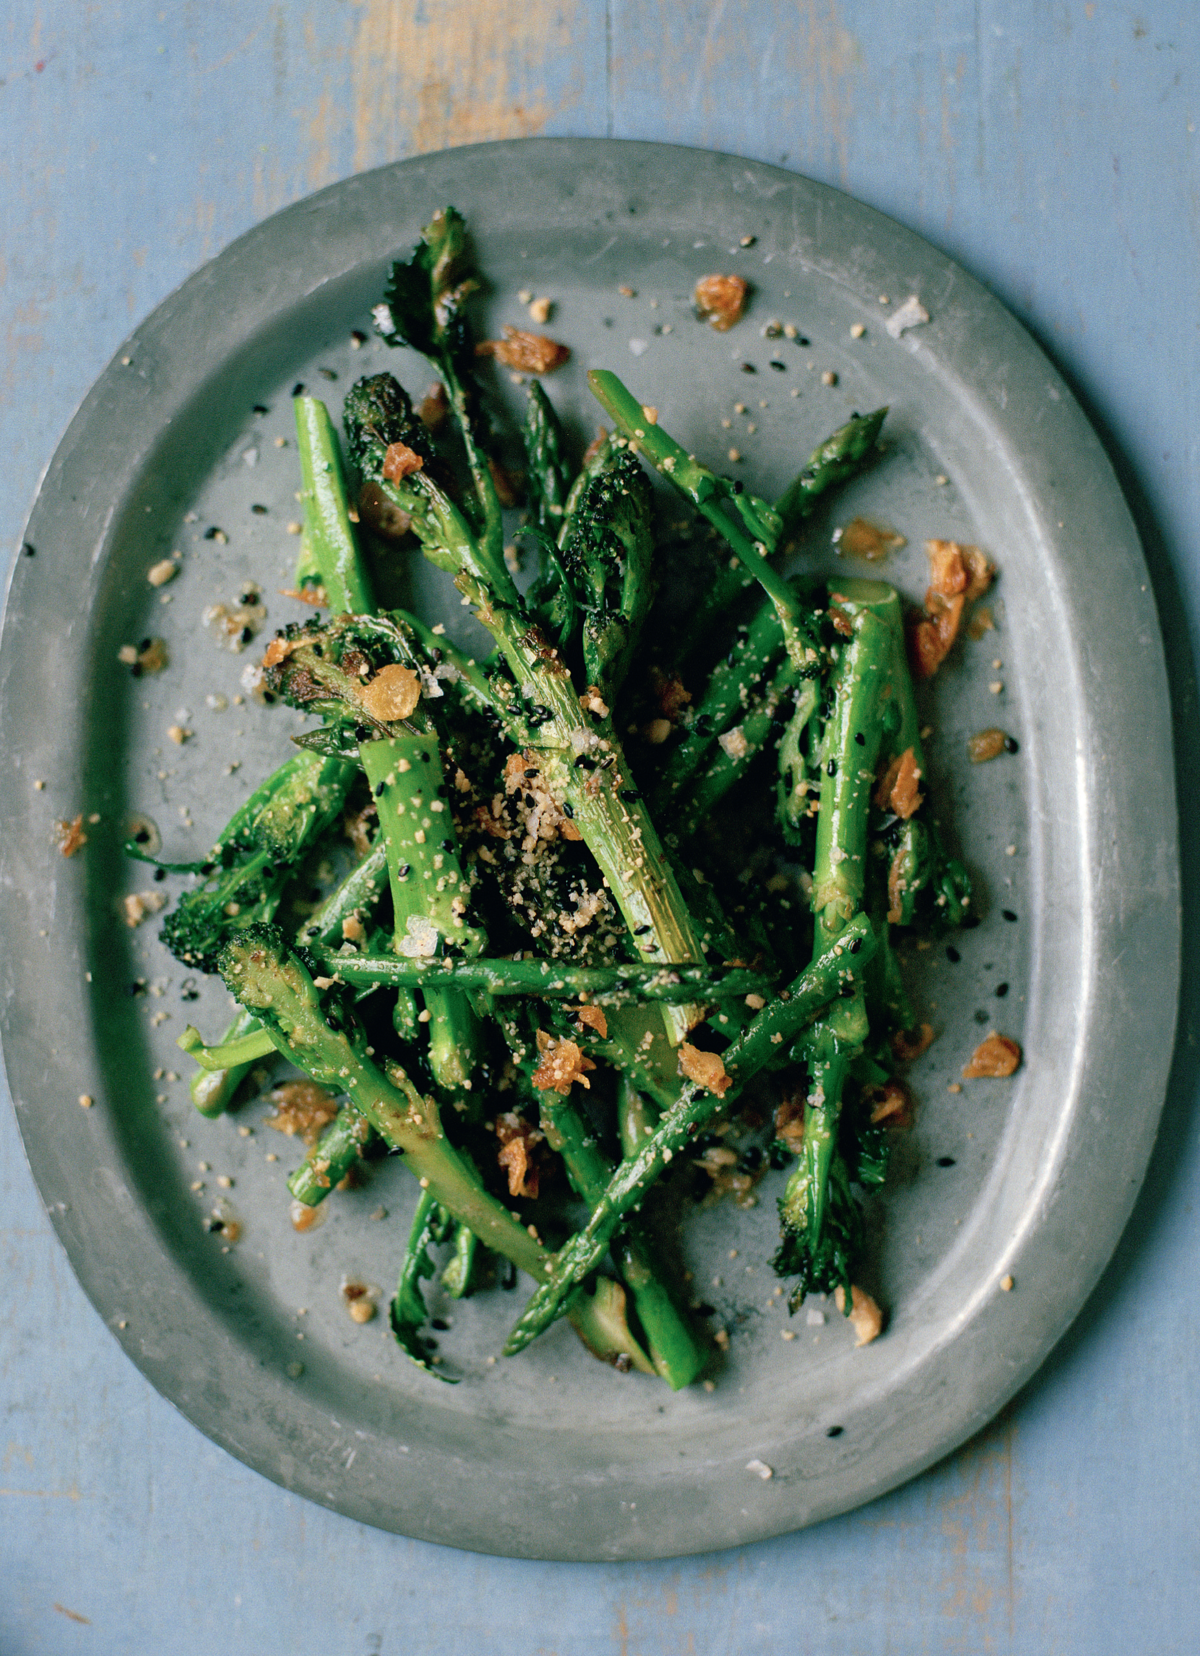 Asparagus and Sprouting Broccoli with Peanuts and Black Sesame Salt